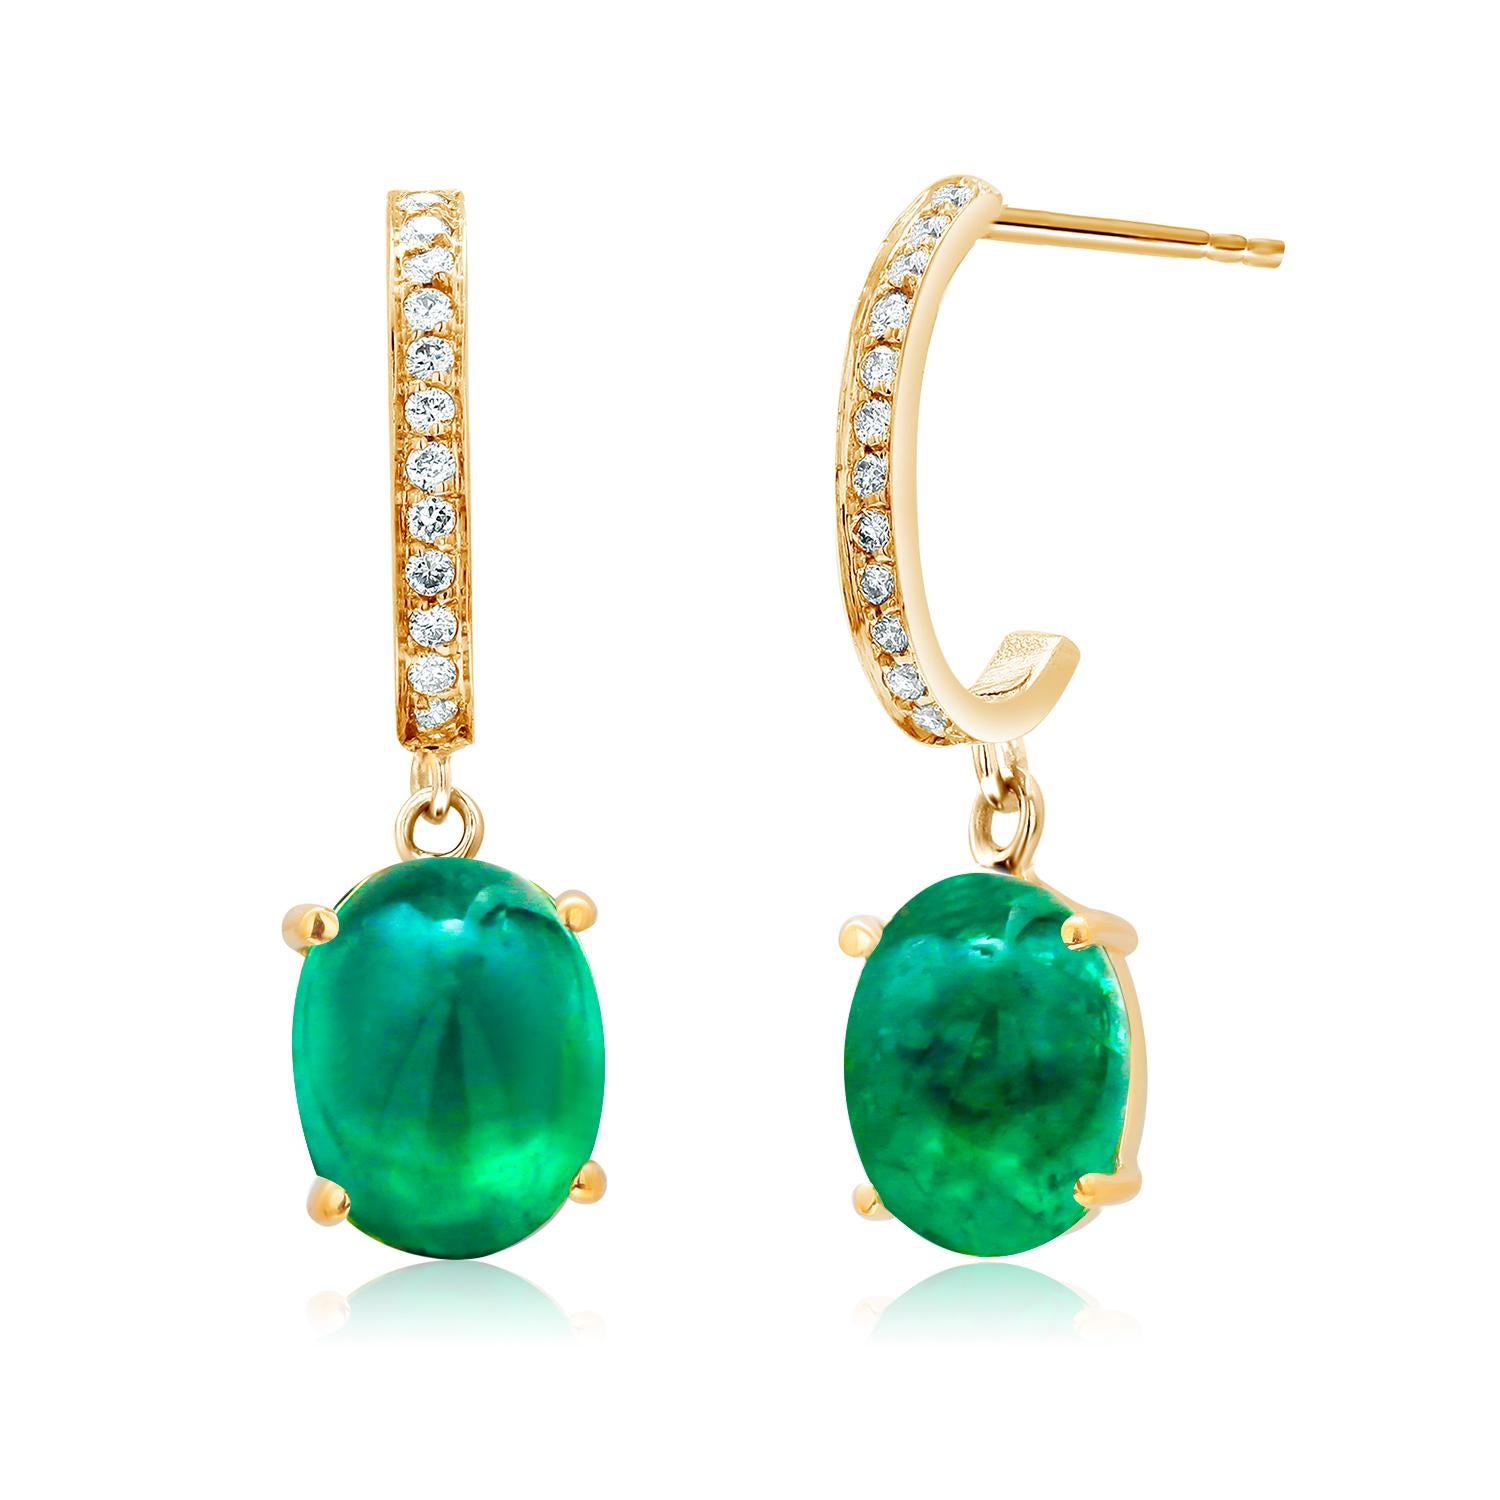 Contemporary Cabochon Emerald Diamond Gold Hoop Earrings Weighing 4.48 Carat